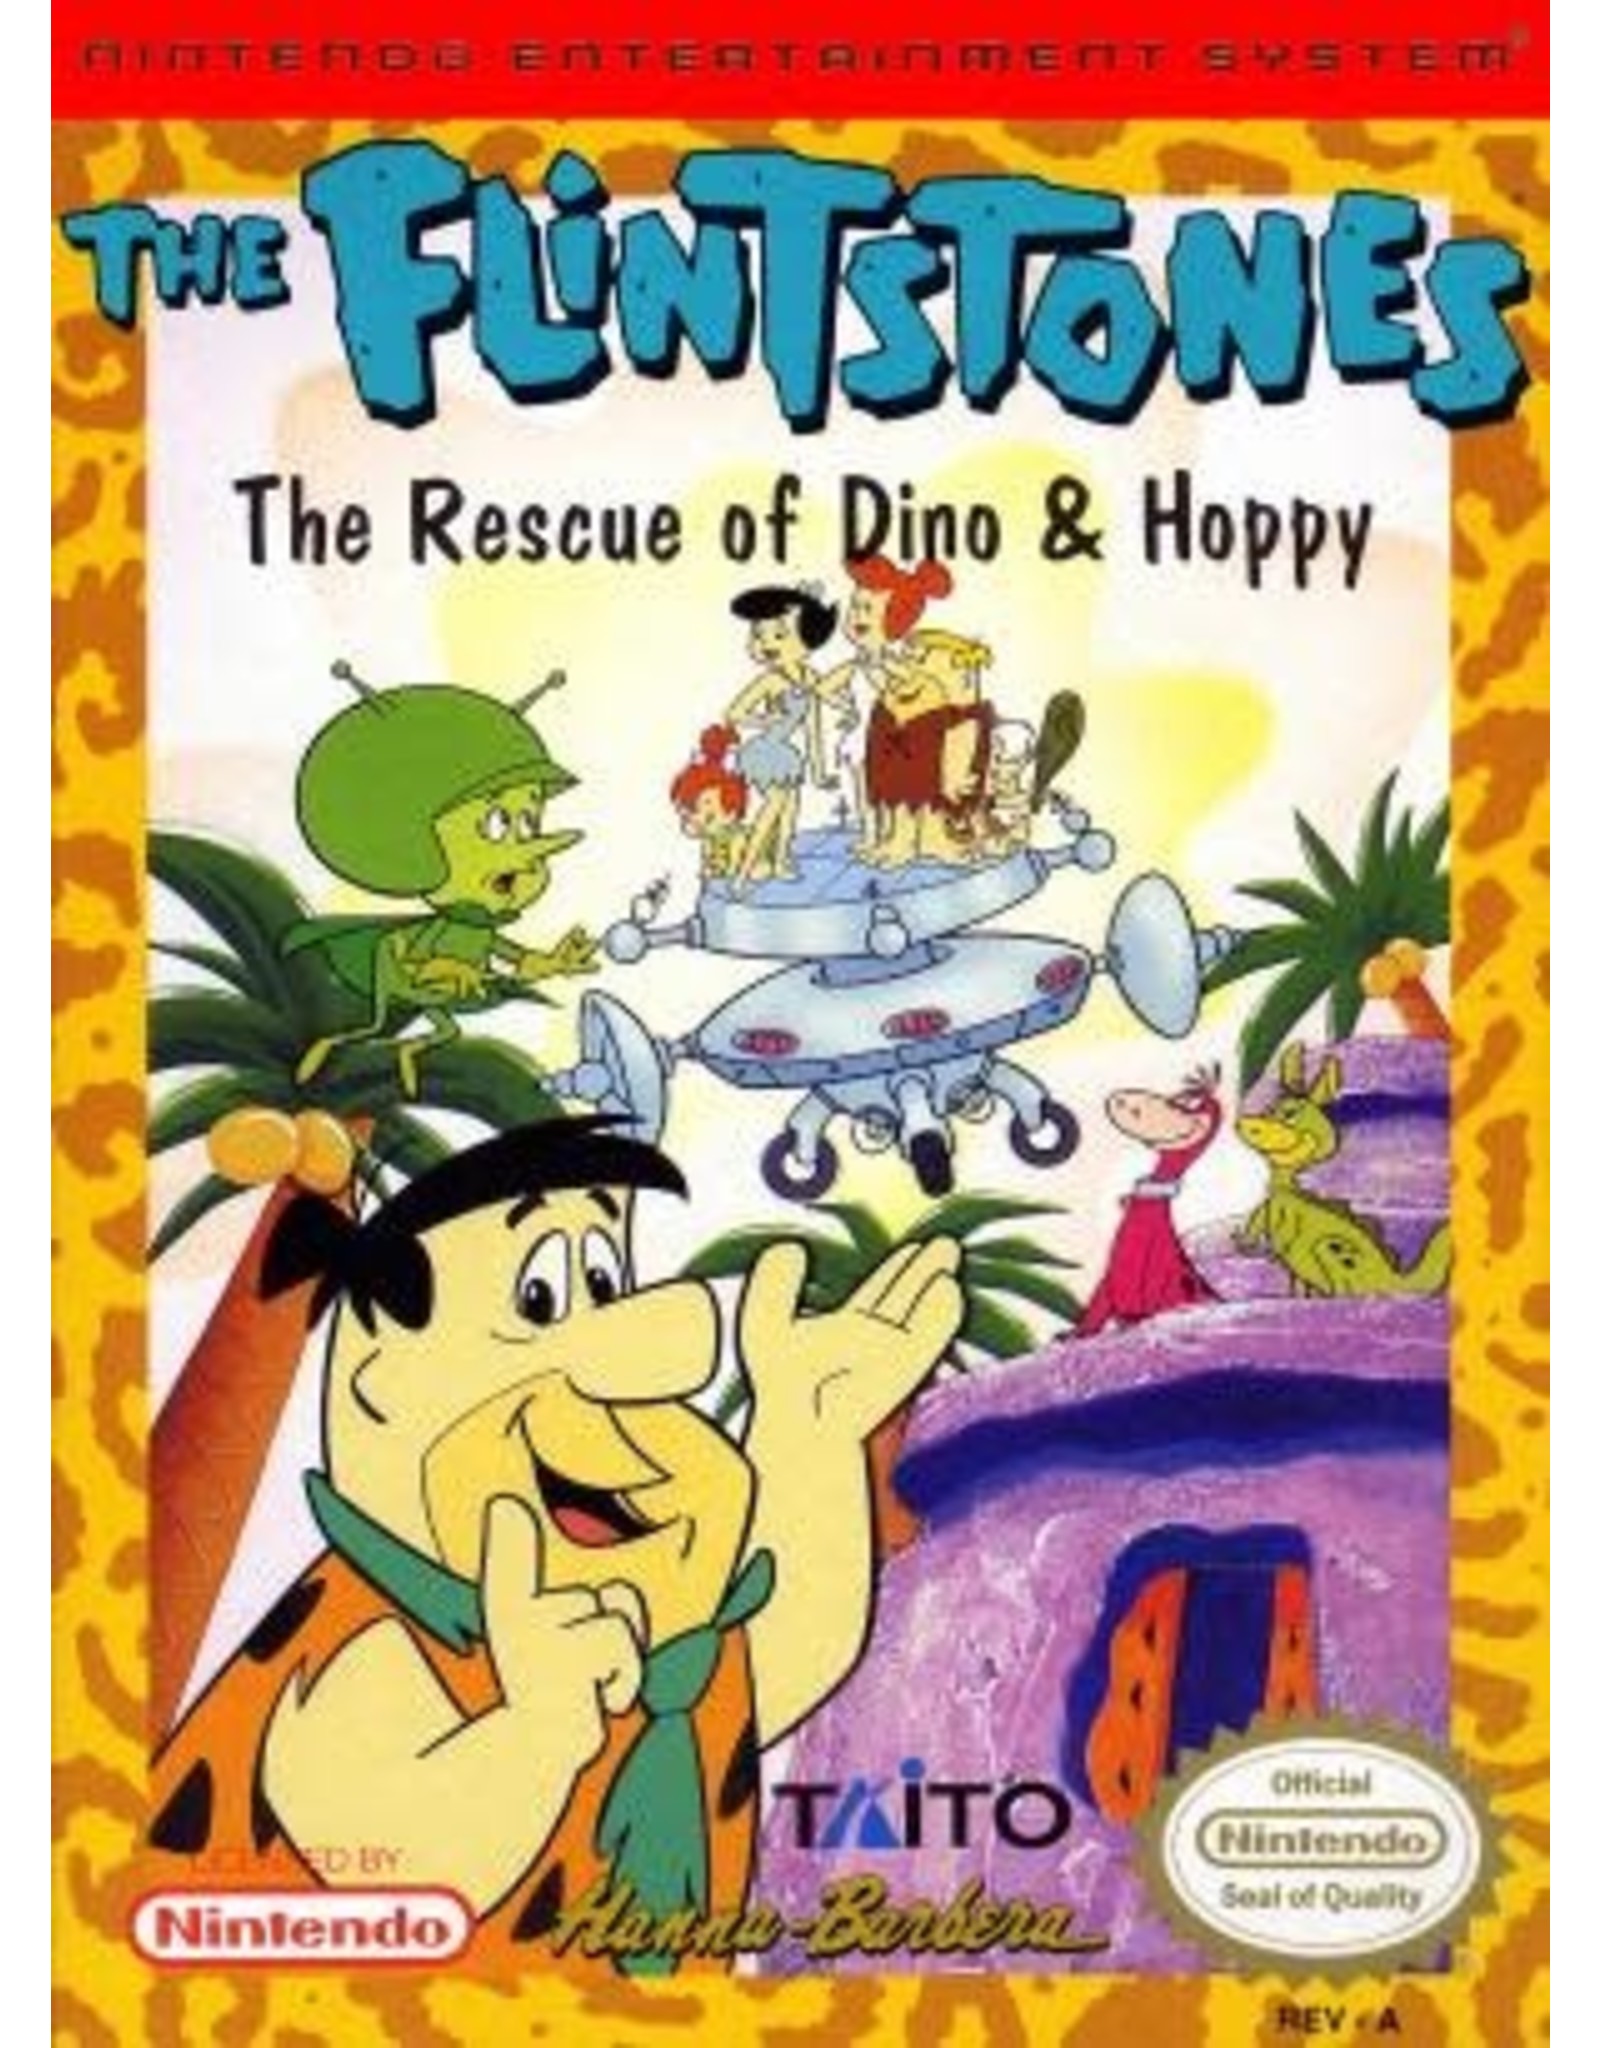 NES Flintstones The Rescue of Dino and Hoppy (Used, Cosmetic Damage)